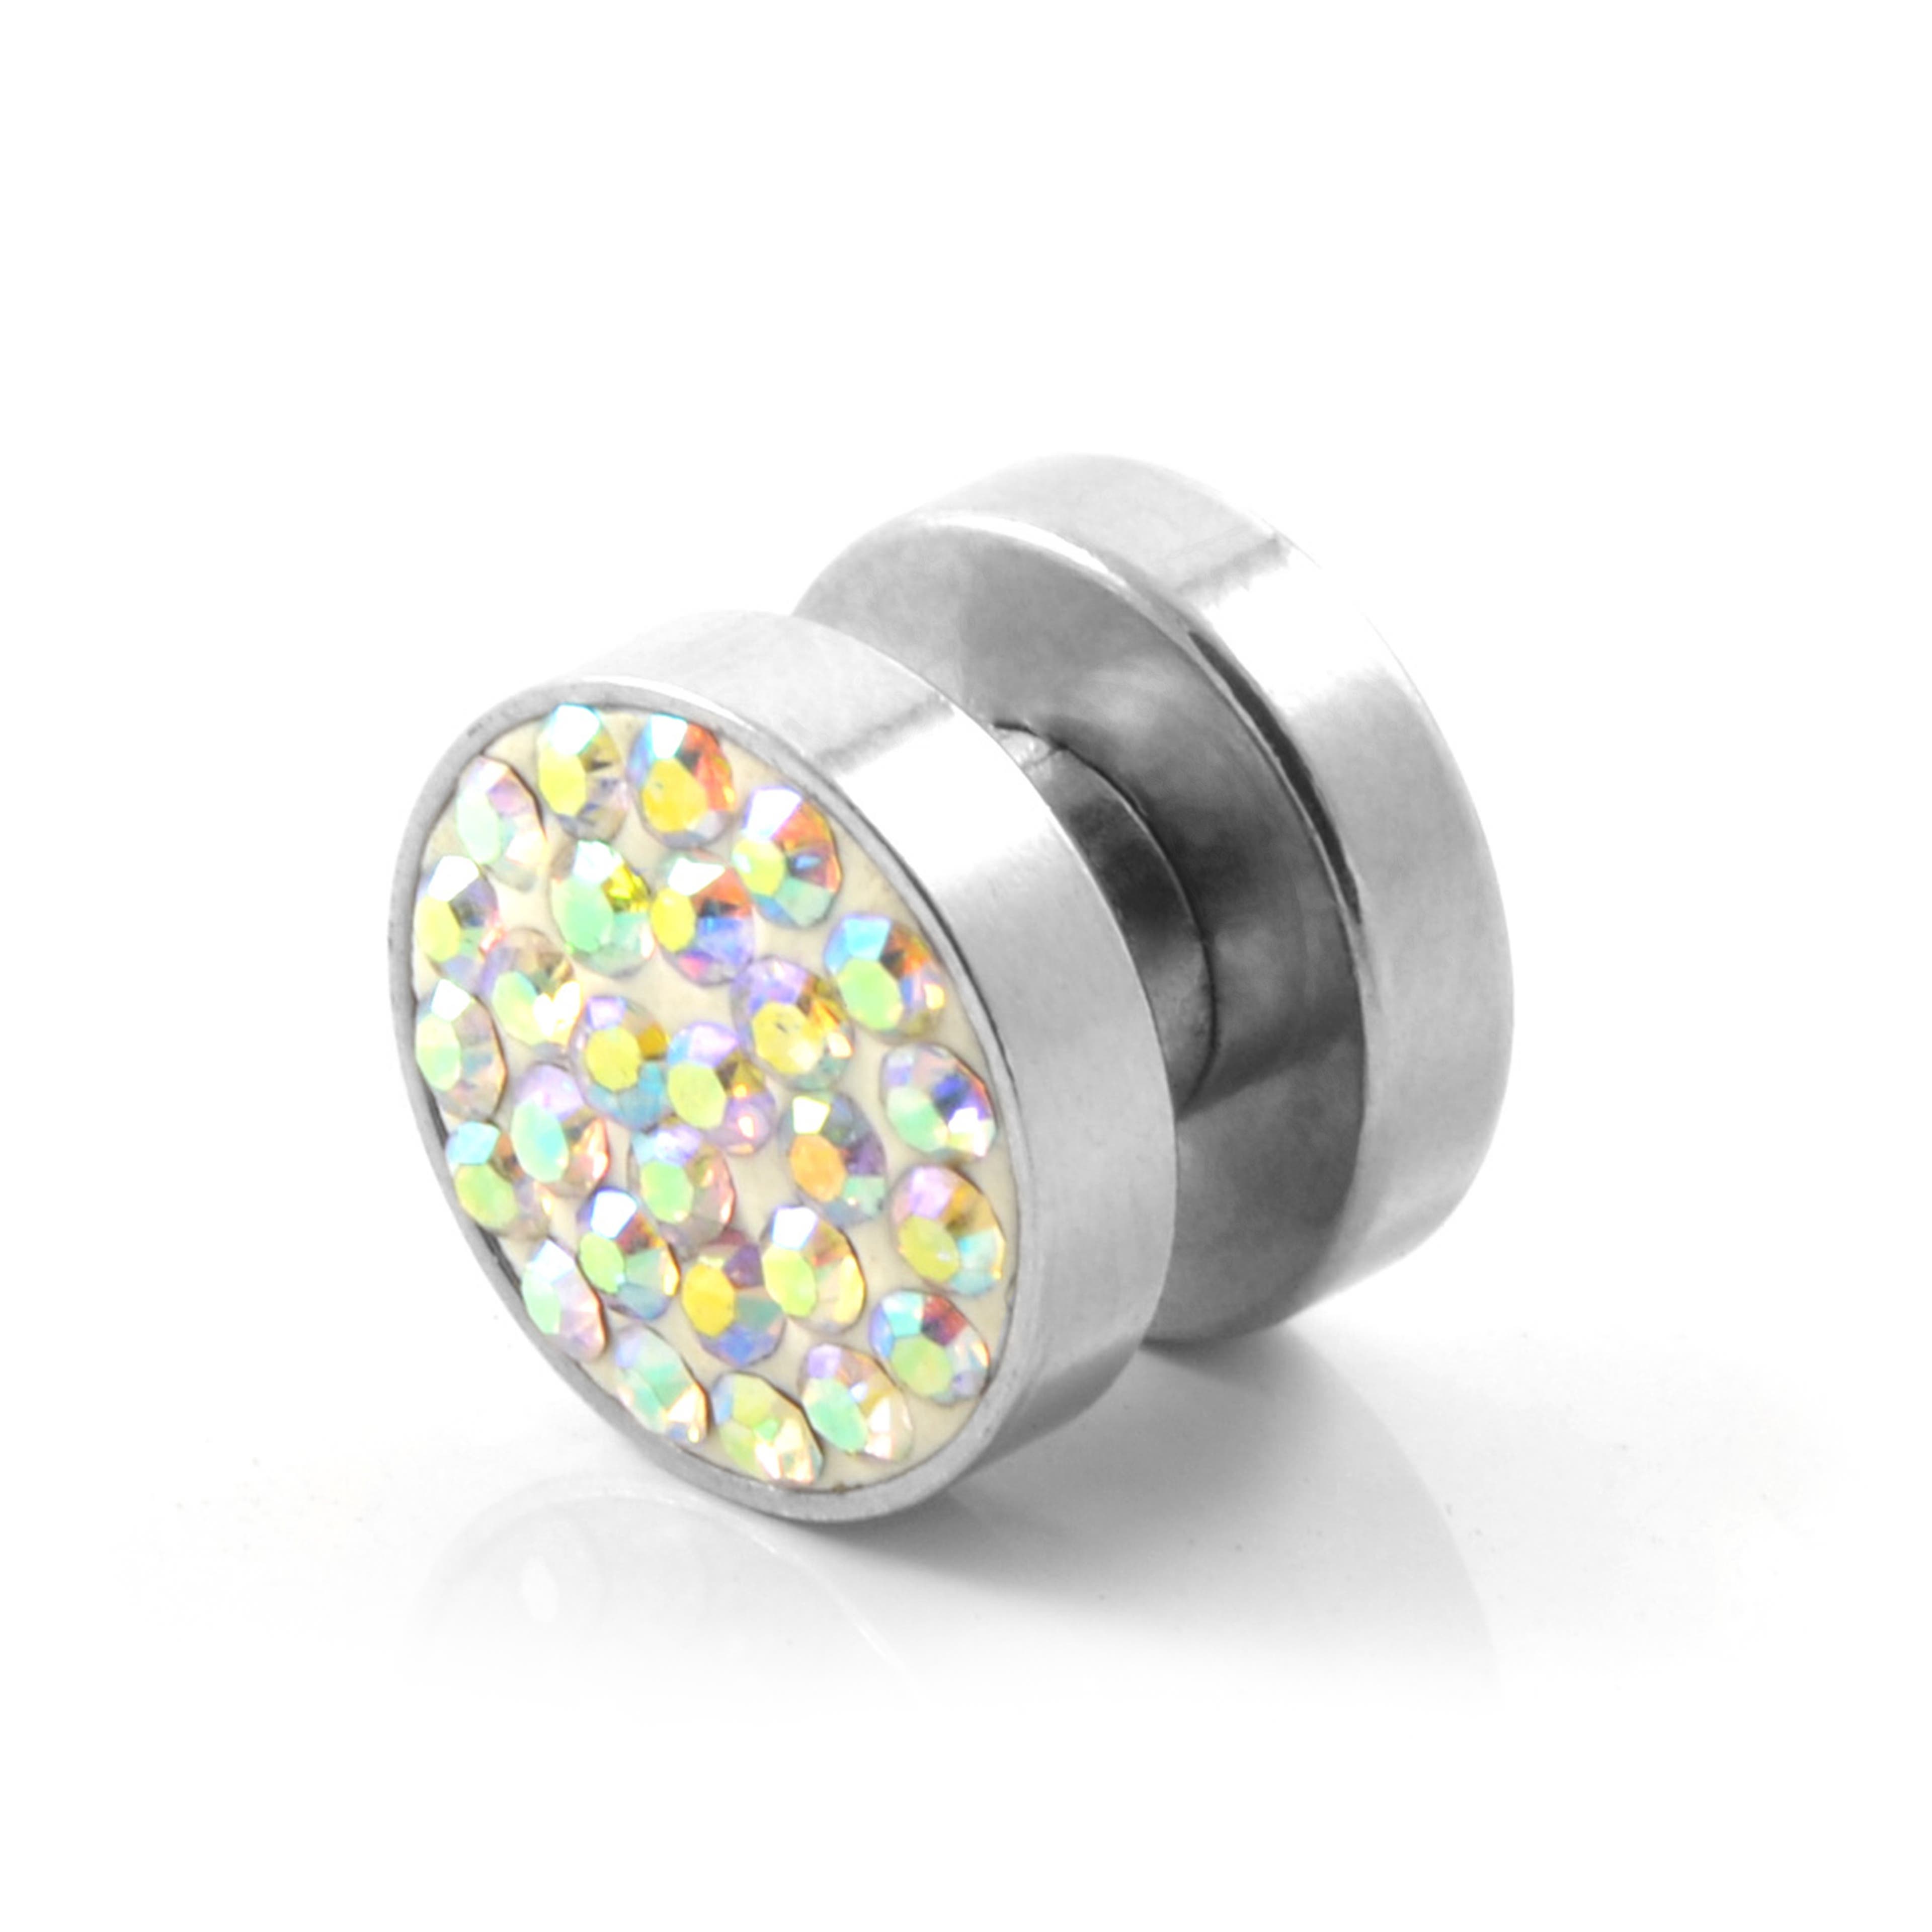 10 mm Multi-Coloured Zirconia Round Magnetic Earring